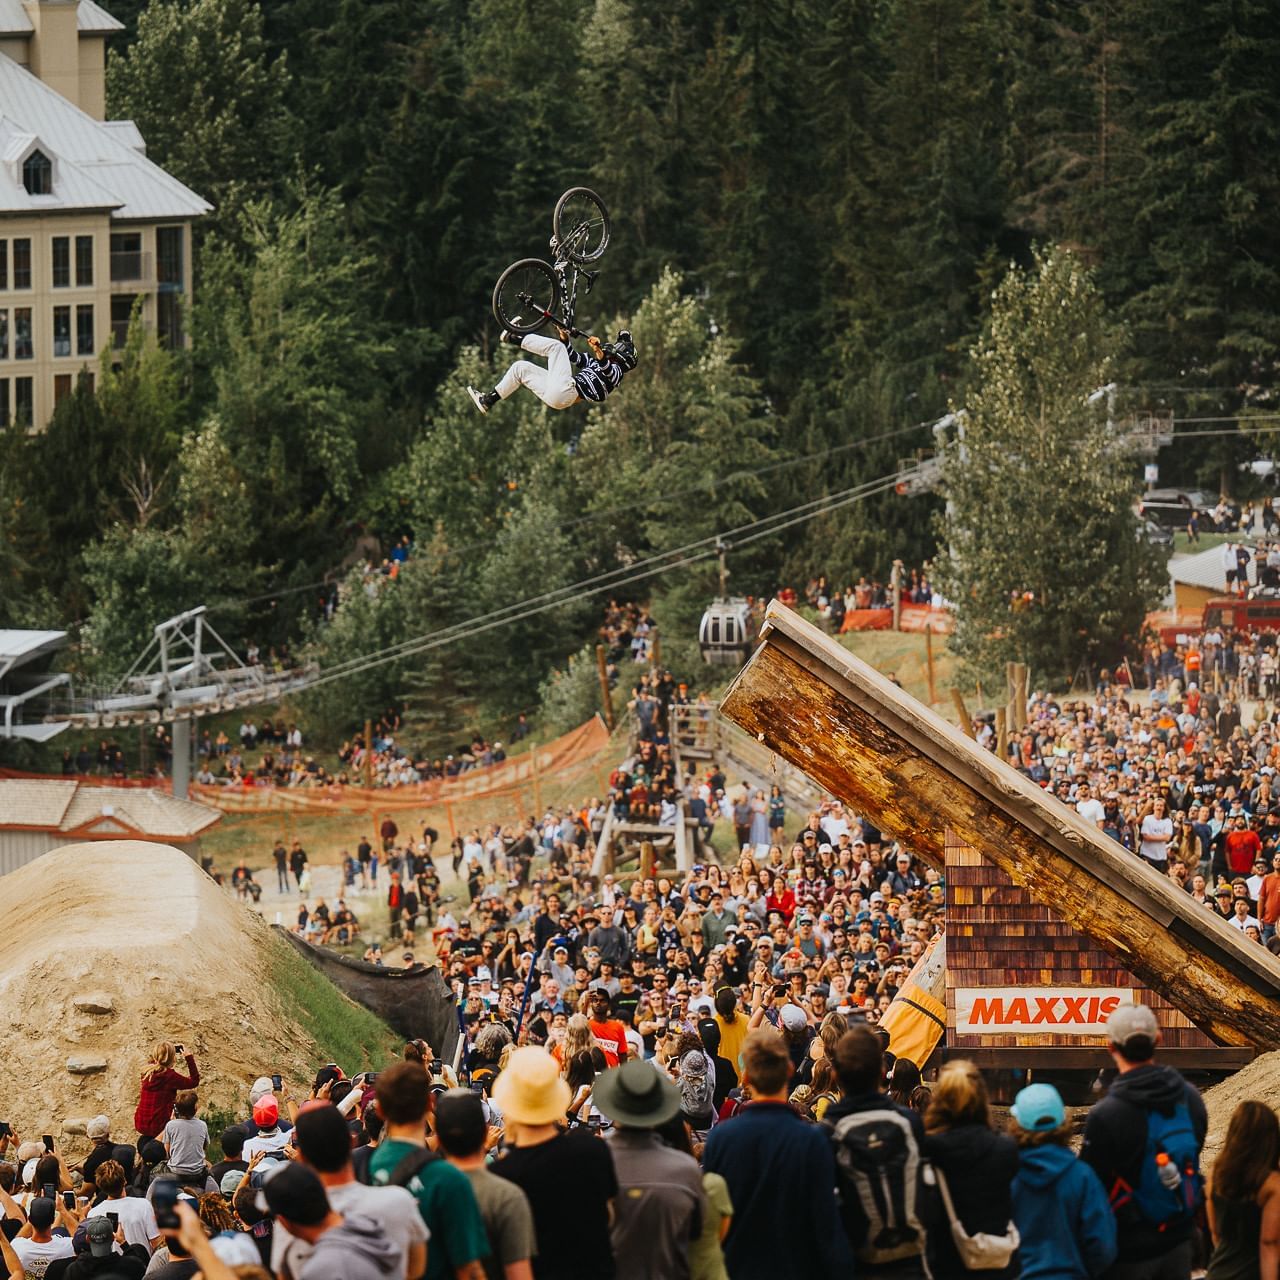 Cyclist in the air over a crowd of people at Whistler Crankworx Festival near Blackcomb Springs Suites